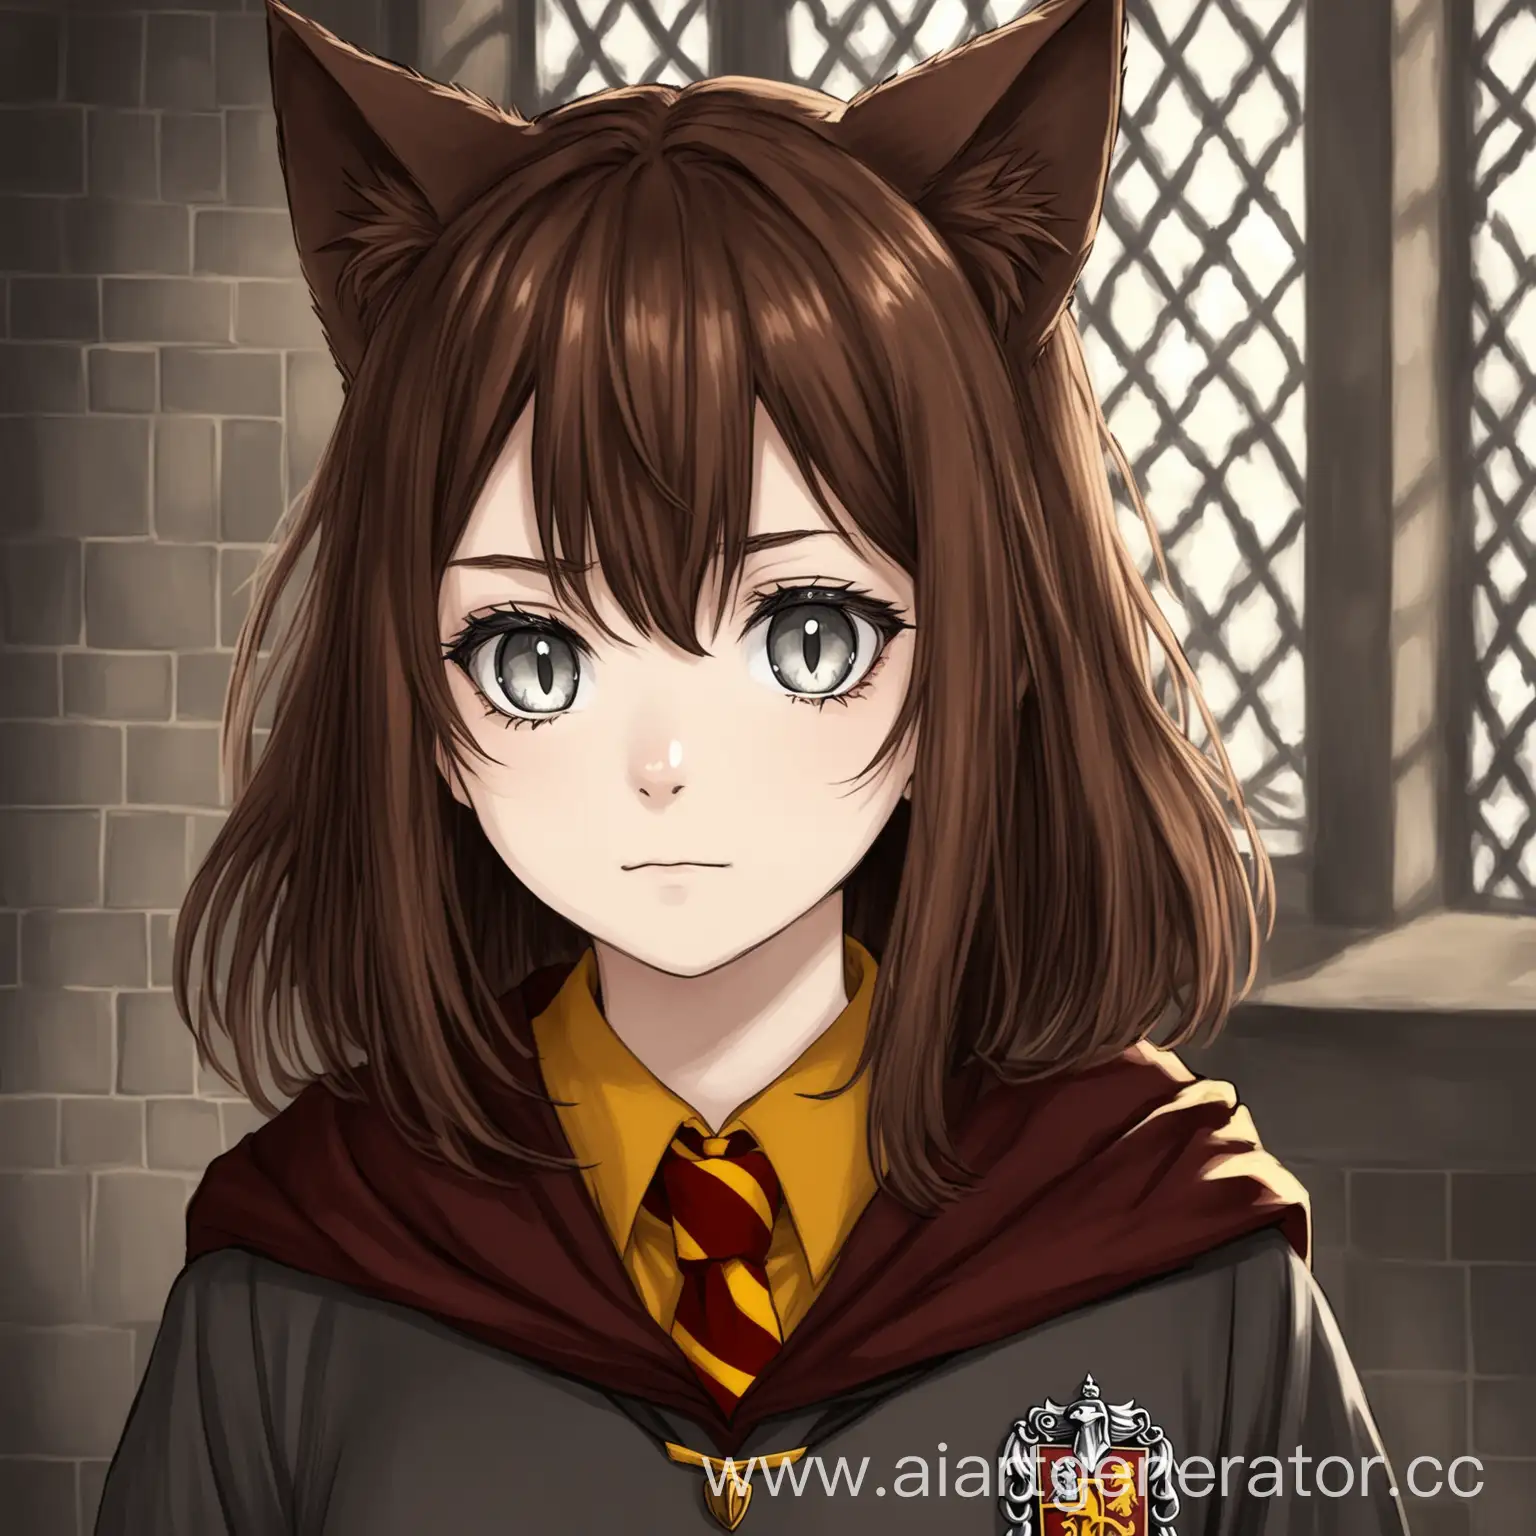 Gryffindor-Student-with-Cat-Ears-Portrait-of-a-BrownHaired-Girl-with-Grey-Eyes